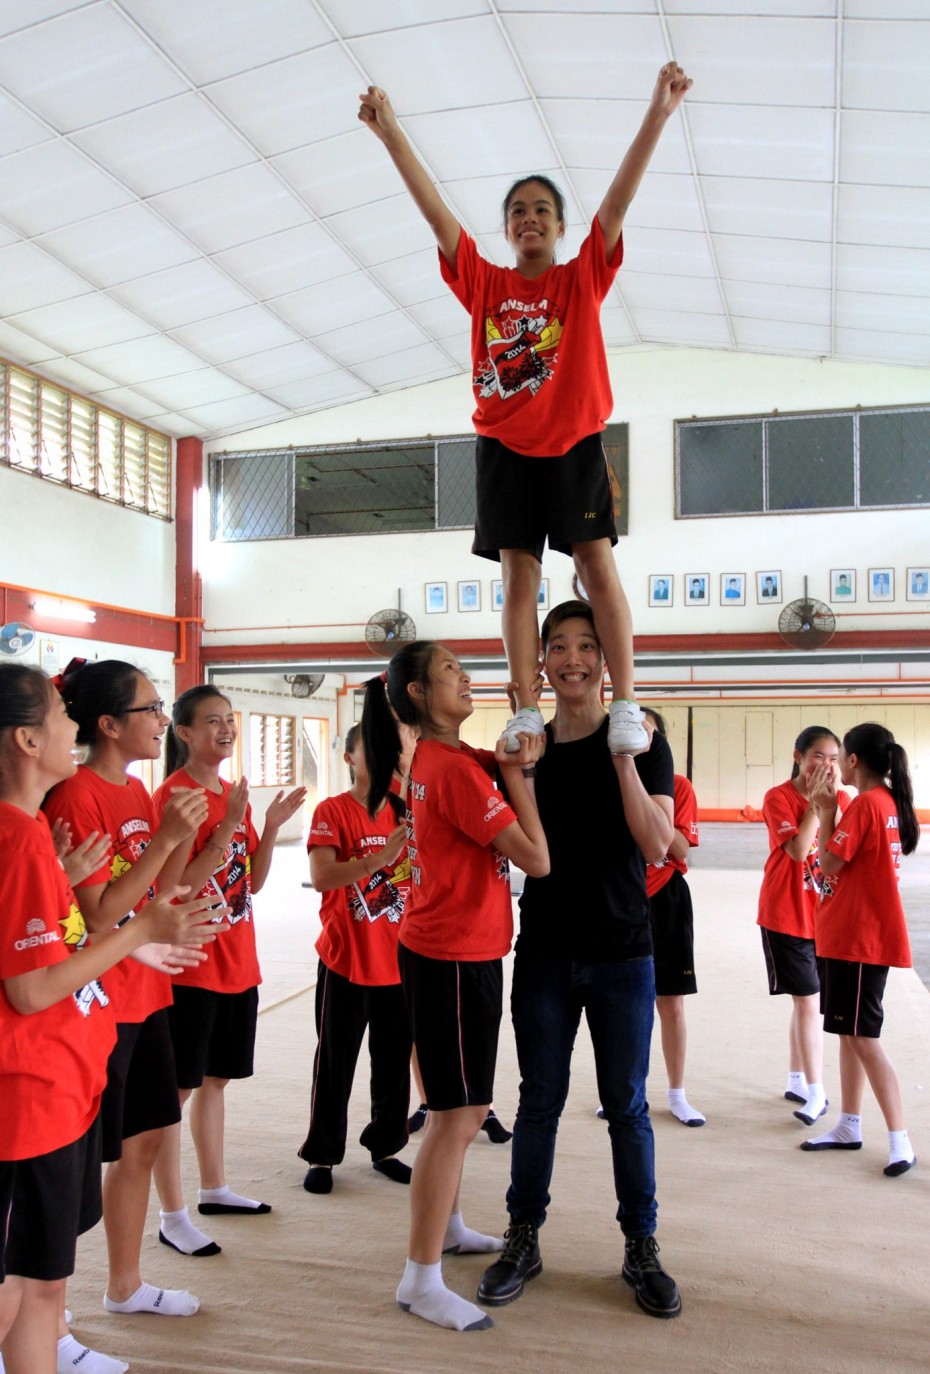 Teo also impressed the cheerleaders by lifting one of them! - Photo: Sam Tham/The Star